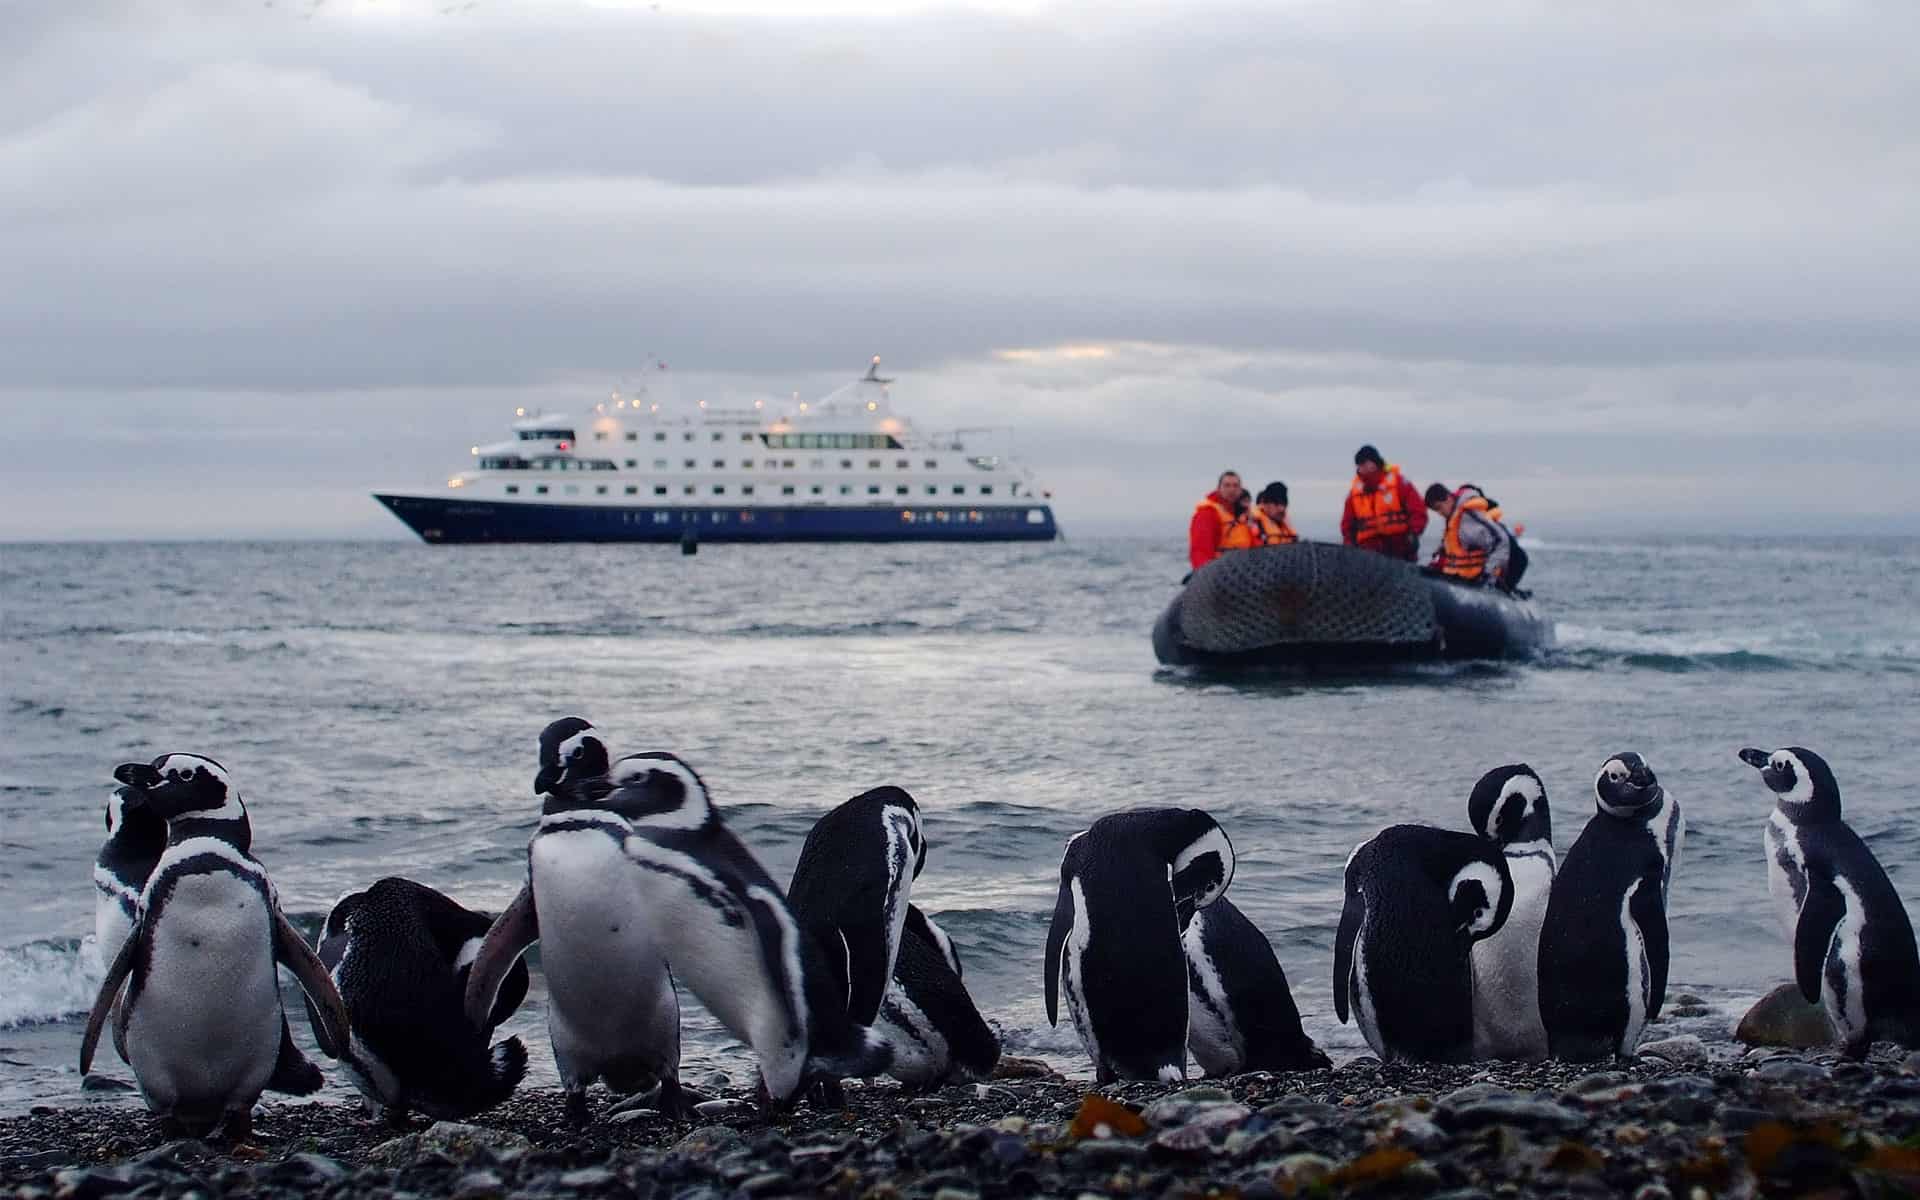 Two black and white penguins stand on shore as a futuristic and modern looking white Antarctica cruise ship navigates the ocean past them.